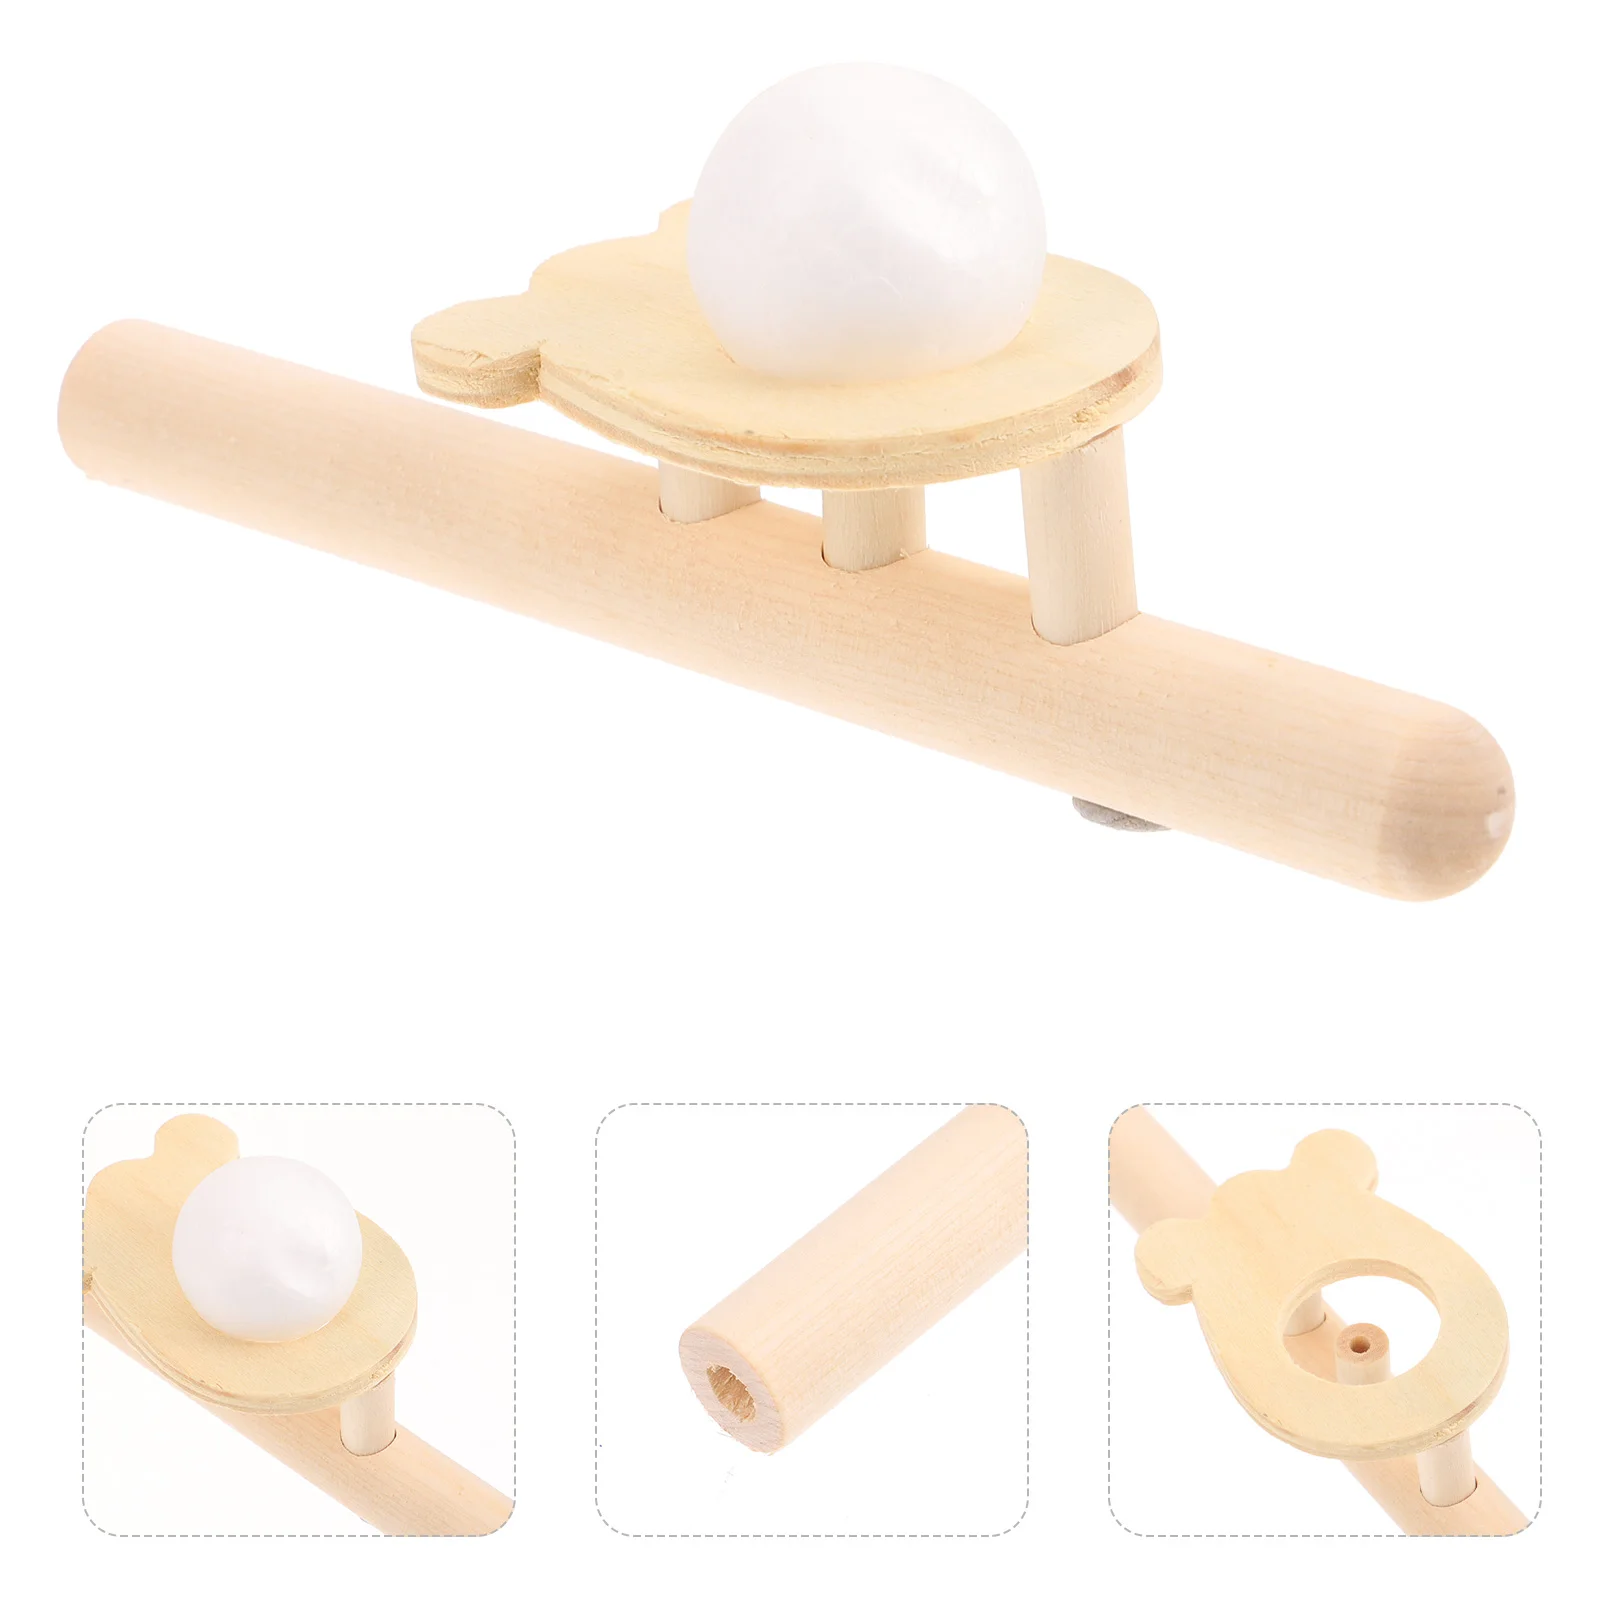 5 Pcs Suspension Ball Blowing Machine Toy Toys The Pipe Kids Bamboo Party Funny for Children